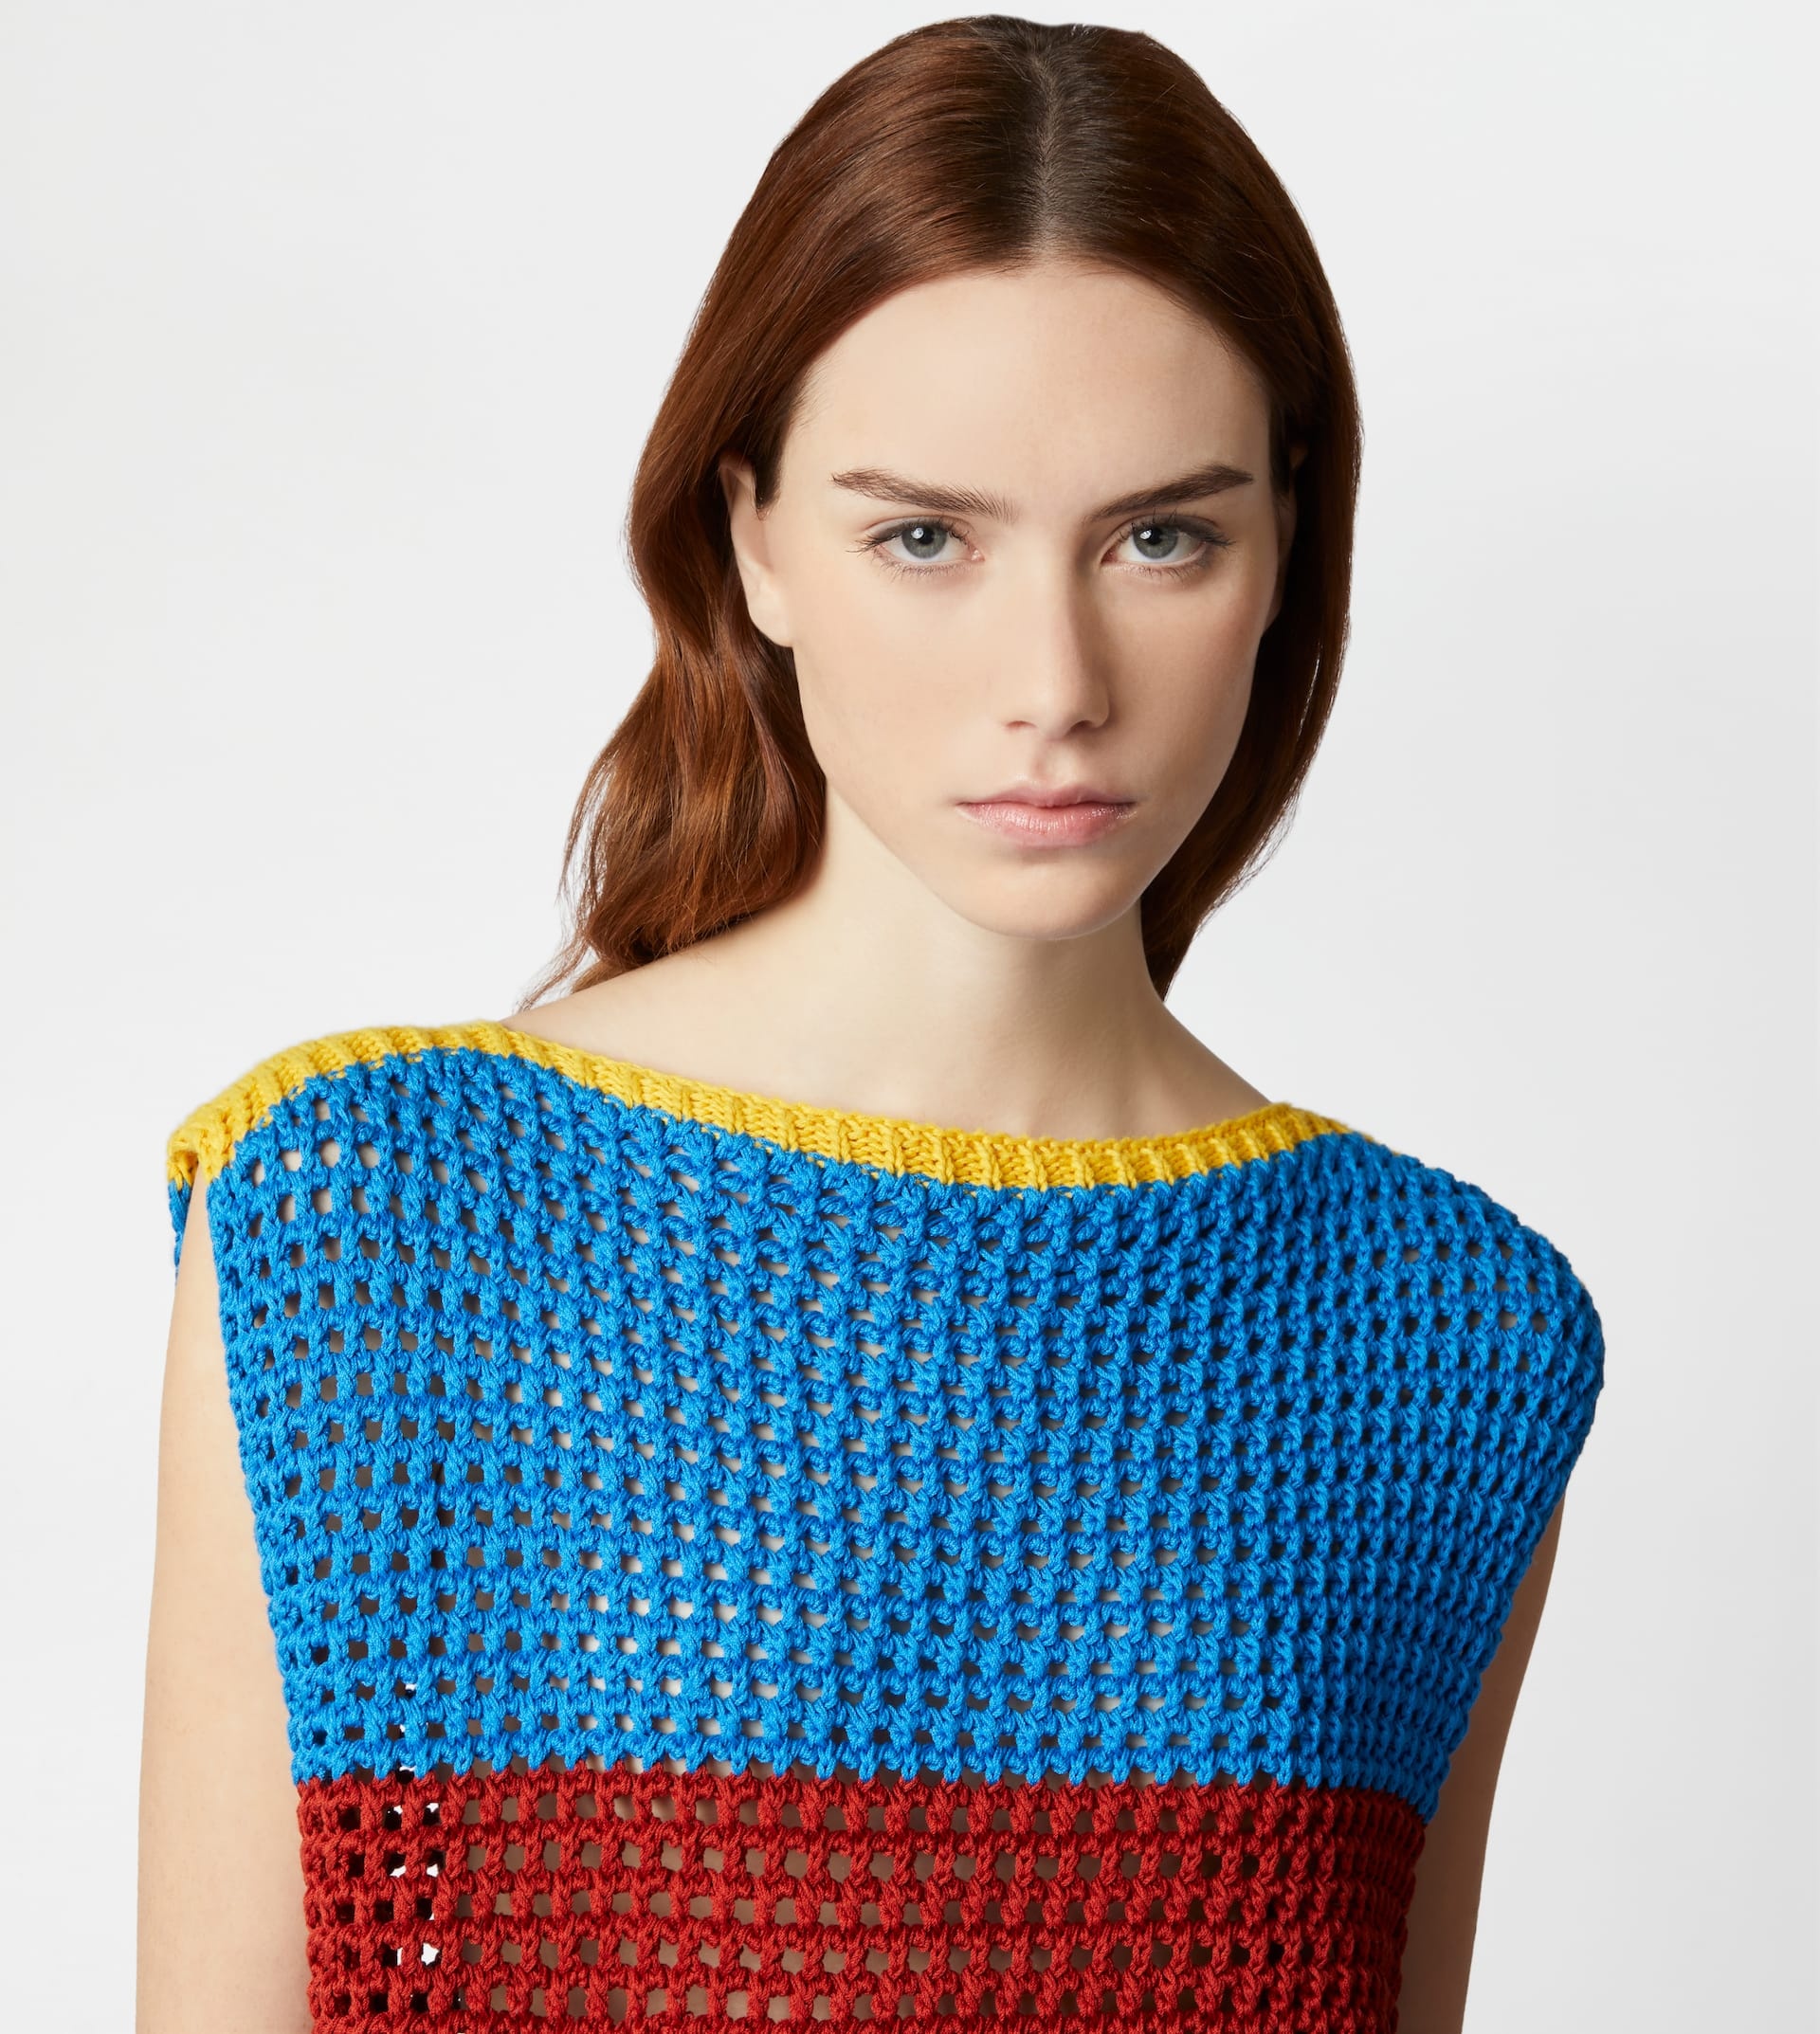 TOP IN COTTON KNIT - RED, LIGHT BLUE, YELLOW - 5